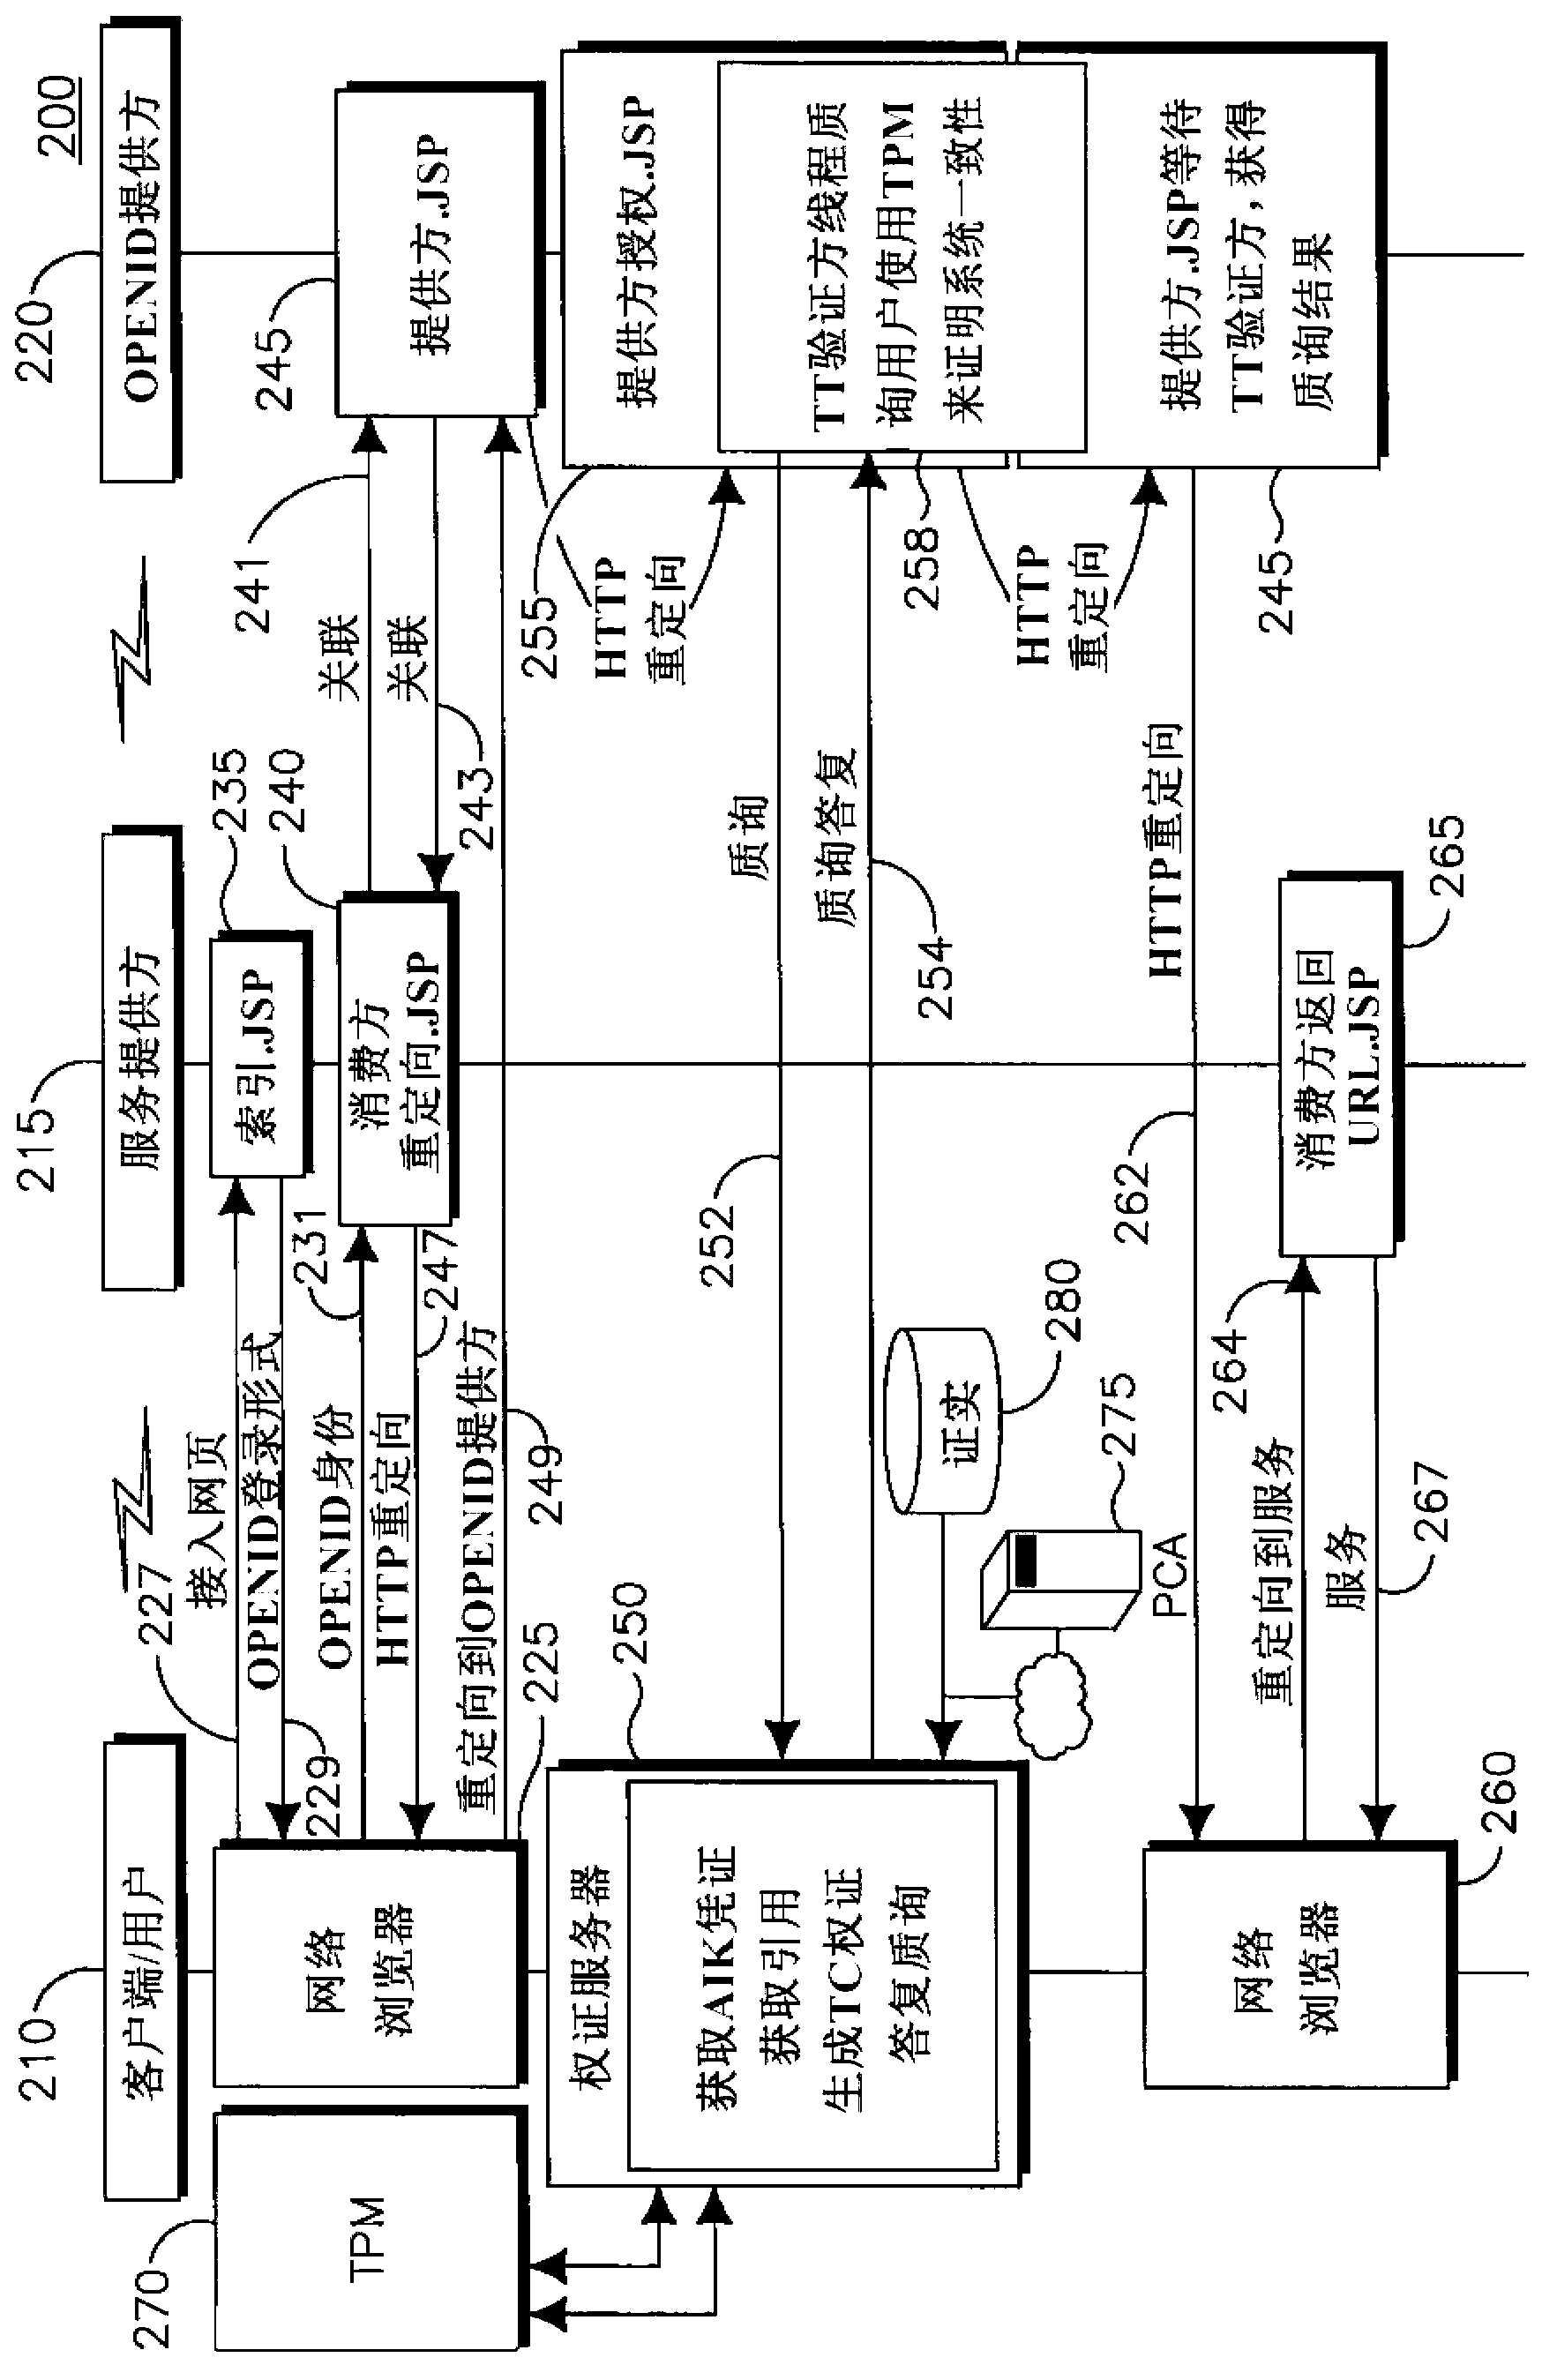 Method and apparatus for trusted federated identity management and data access authorization